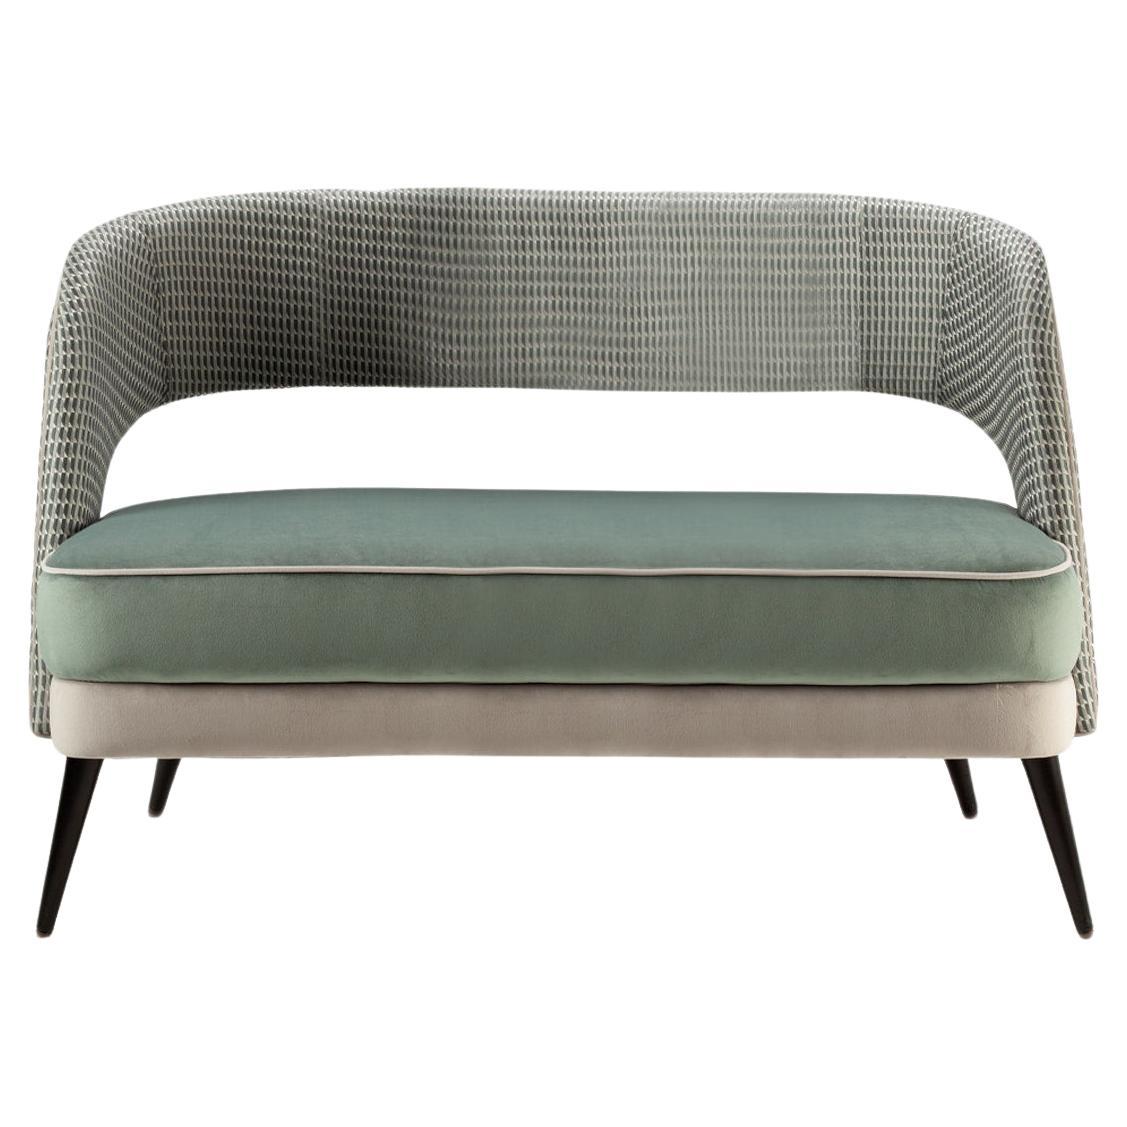 Ava Settee 2-Seat Sea Green Seat and Textured Grey Backrest Wooden Feet For Sale